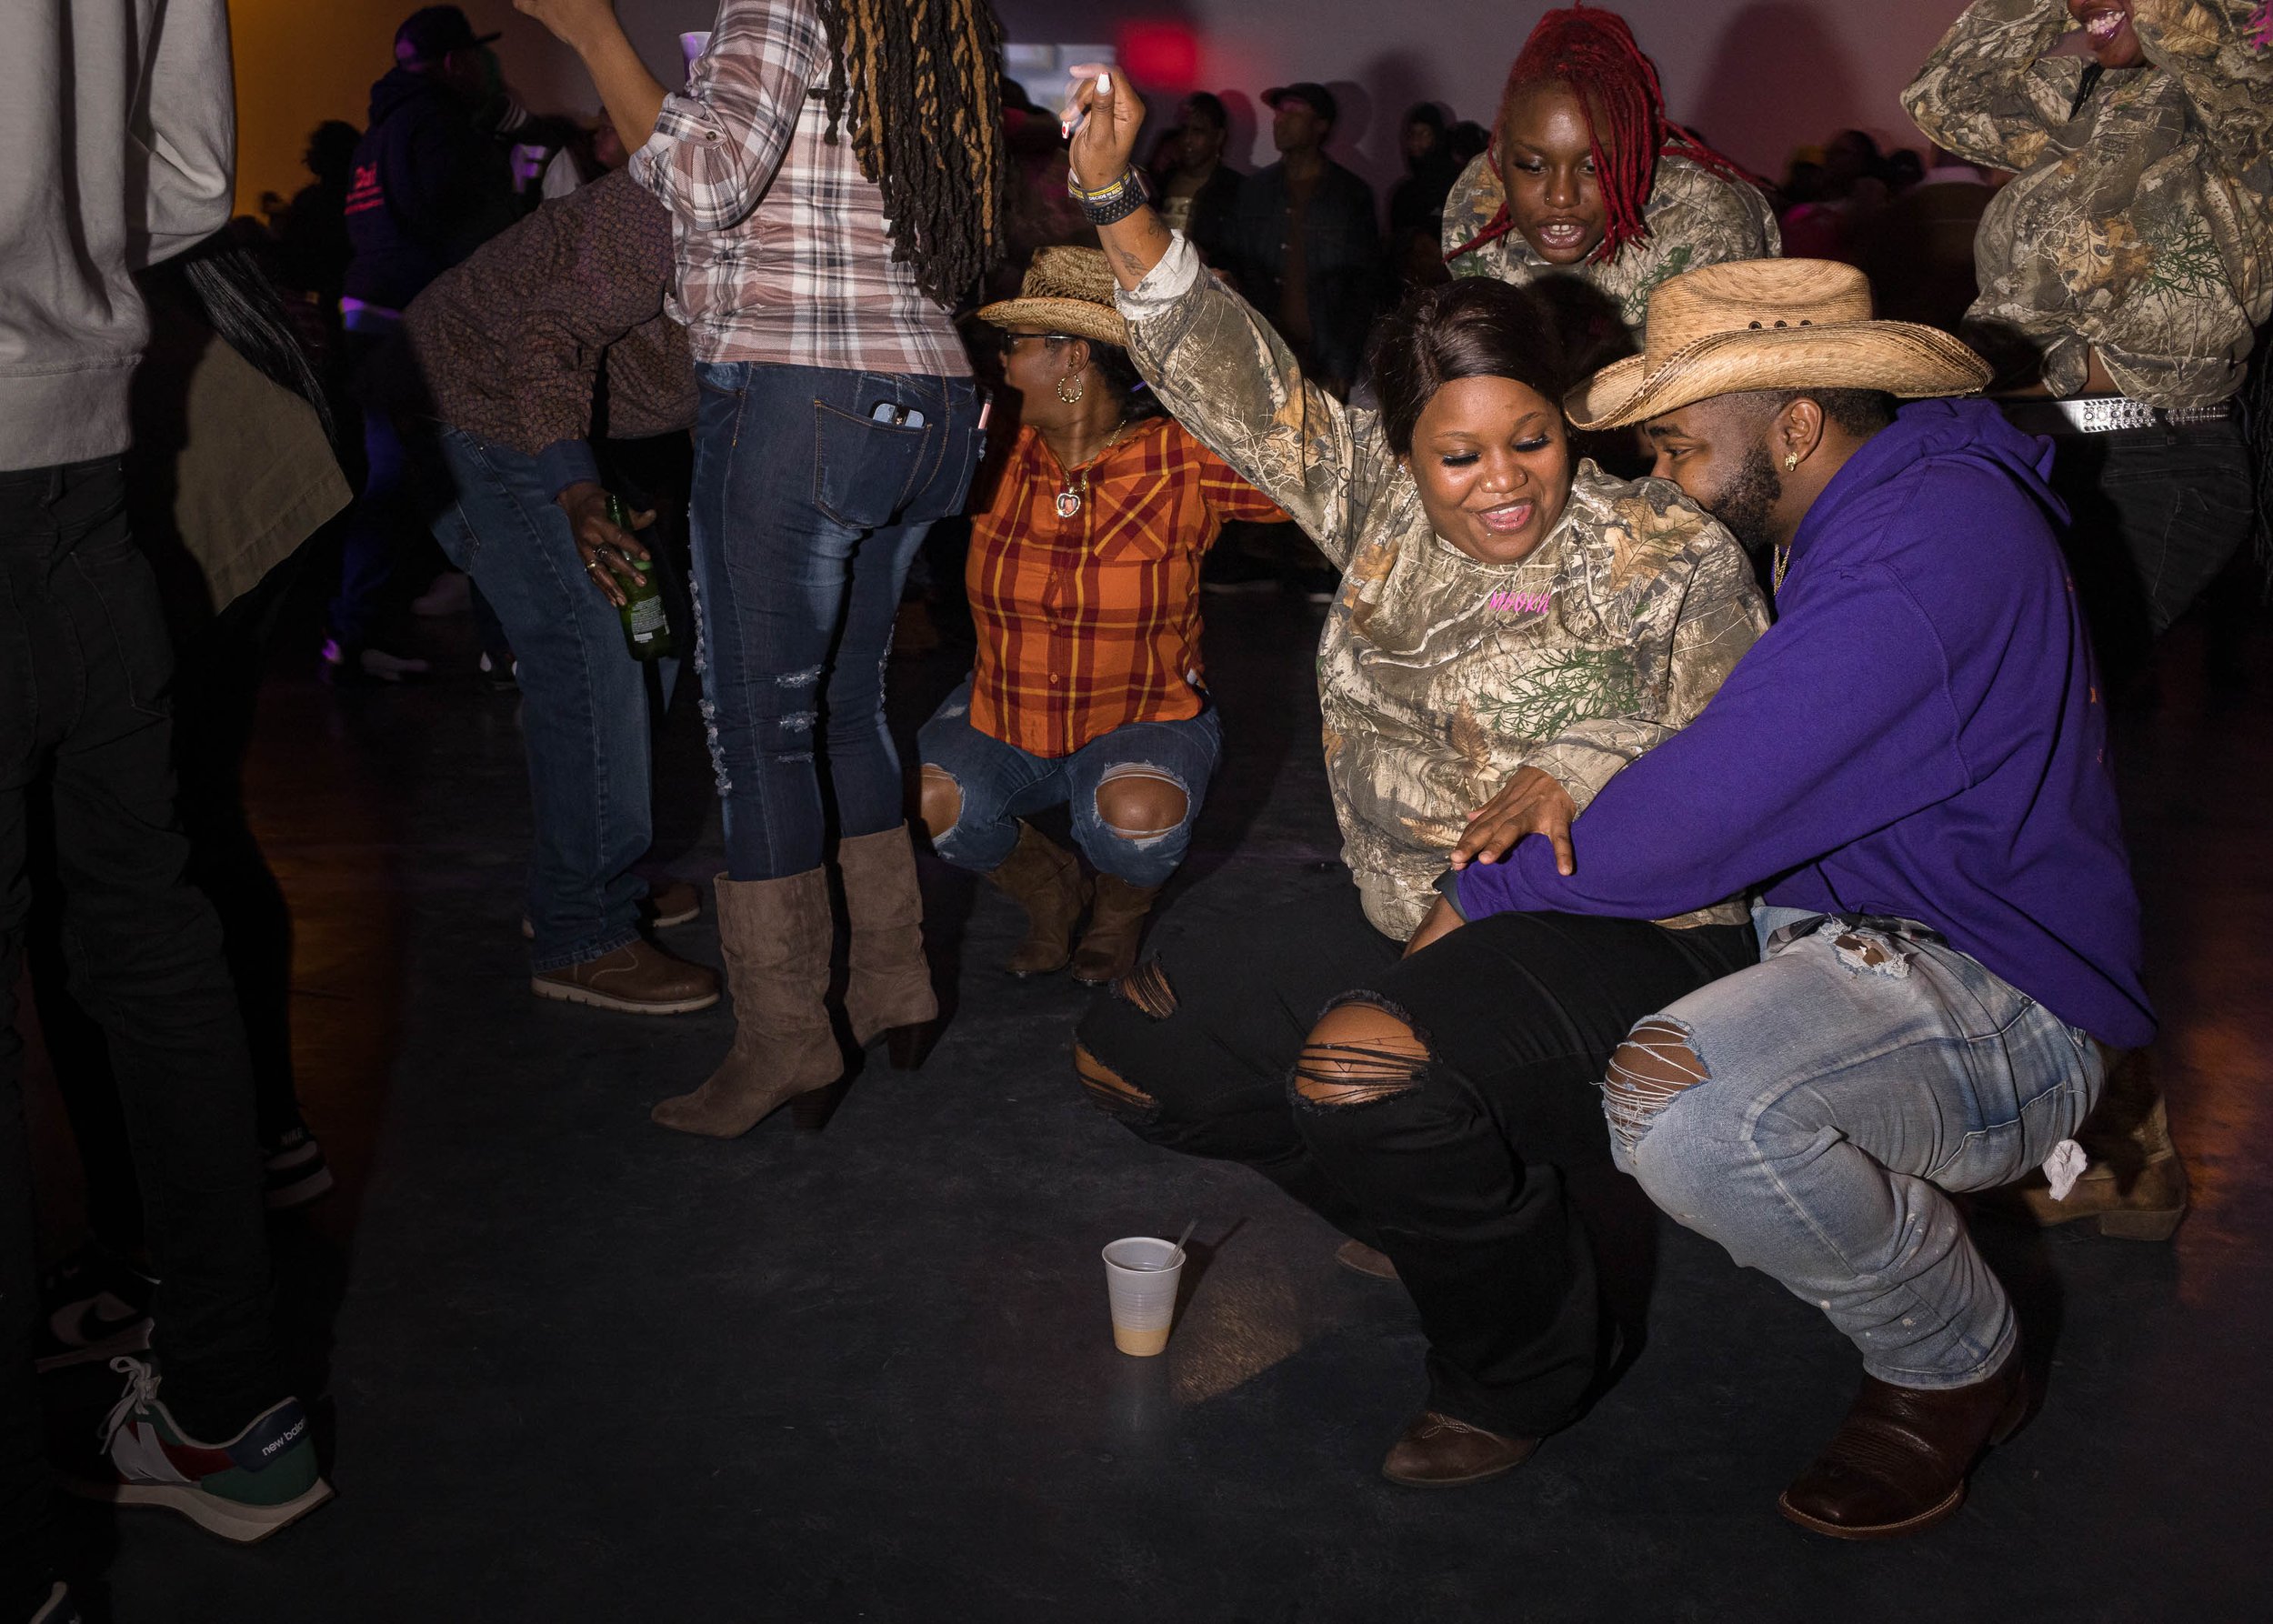  Rodeo Dance night at the Tru Vegas Events Center during Founders’ Week in Princeville, 2023. From ORIGINS: Climate Change and Solutions in Princeville, North Carolina, America's Oldest Incorporated Black Town. 